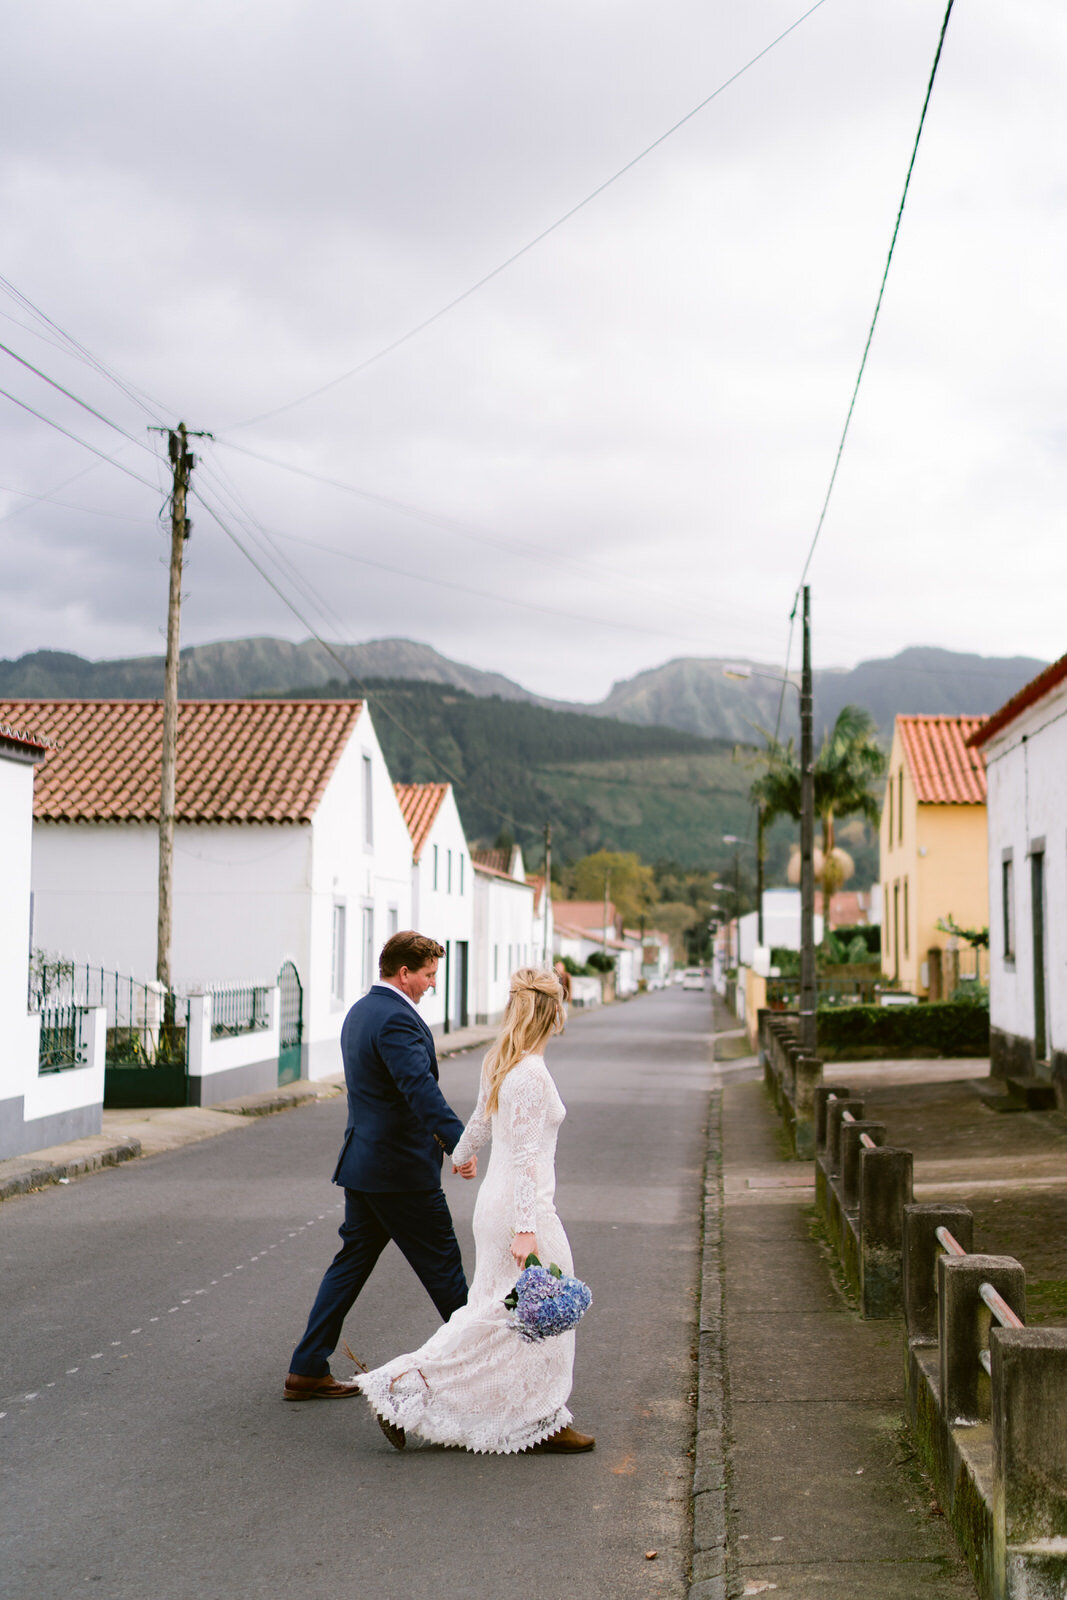 Elopement in the Azores. Cpuple getting married in Portugal. Elopement photography in Europe. Epic locations to elope in the world. Sao Miquel island Azores wedding (50).jpg